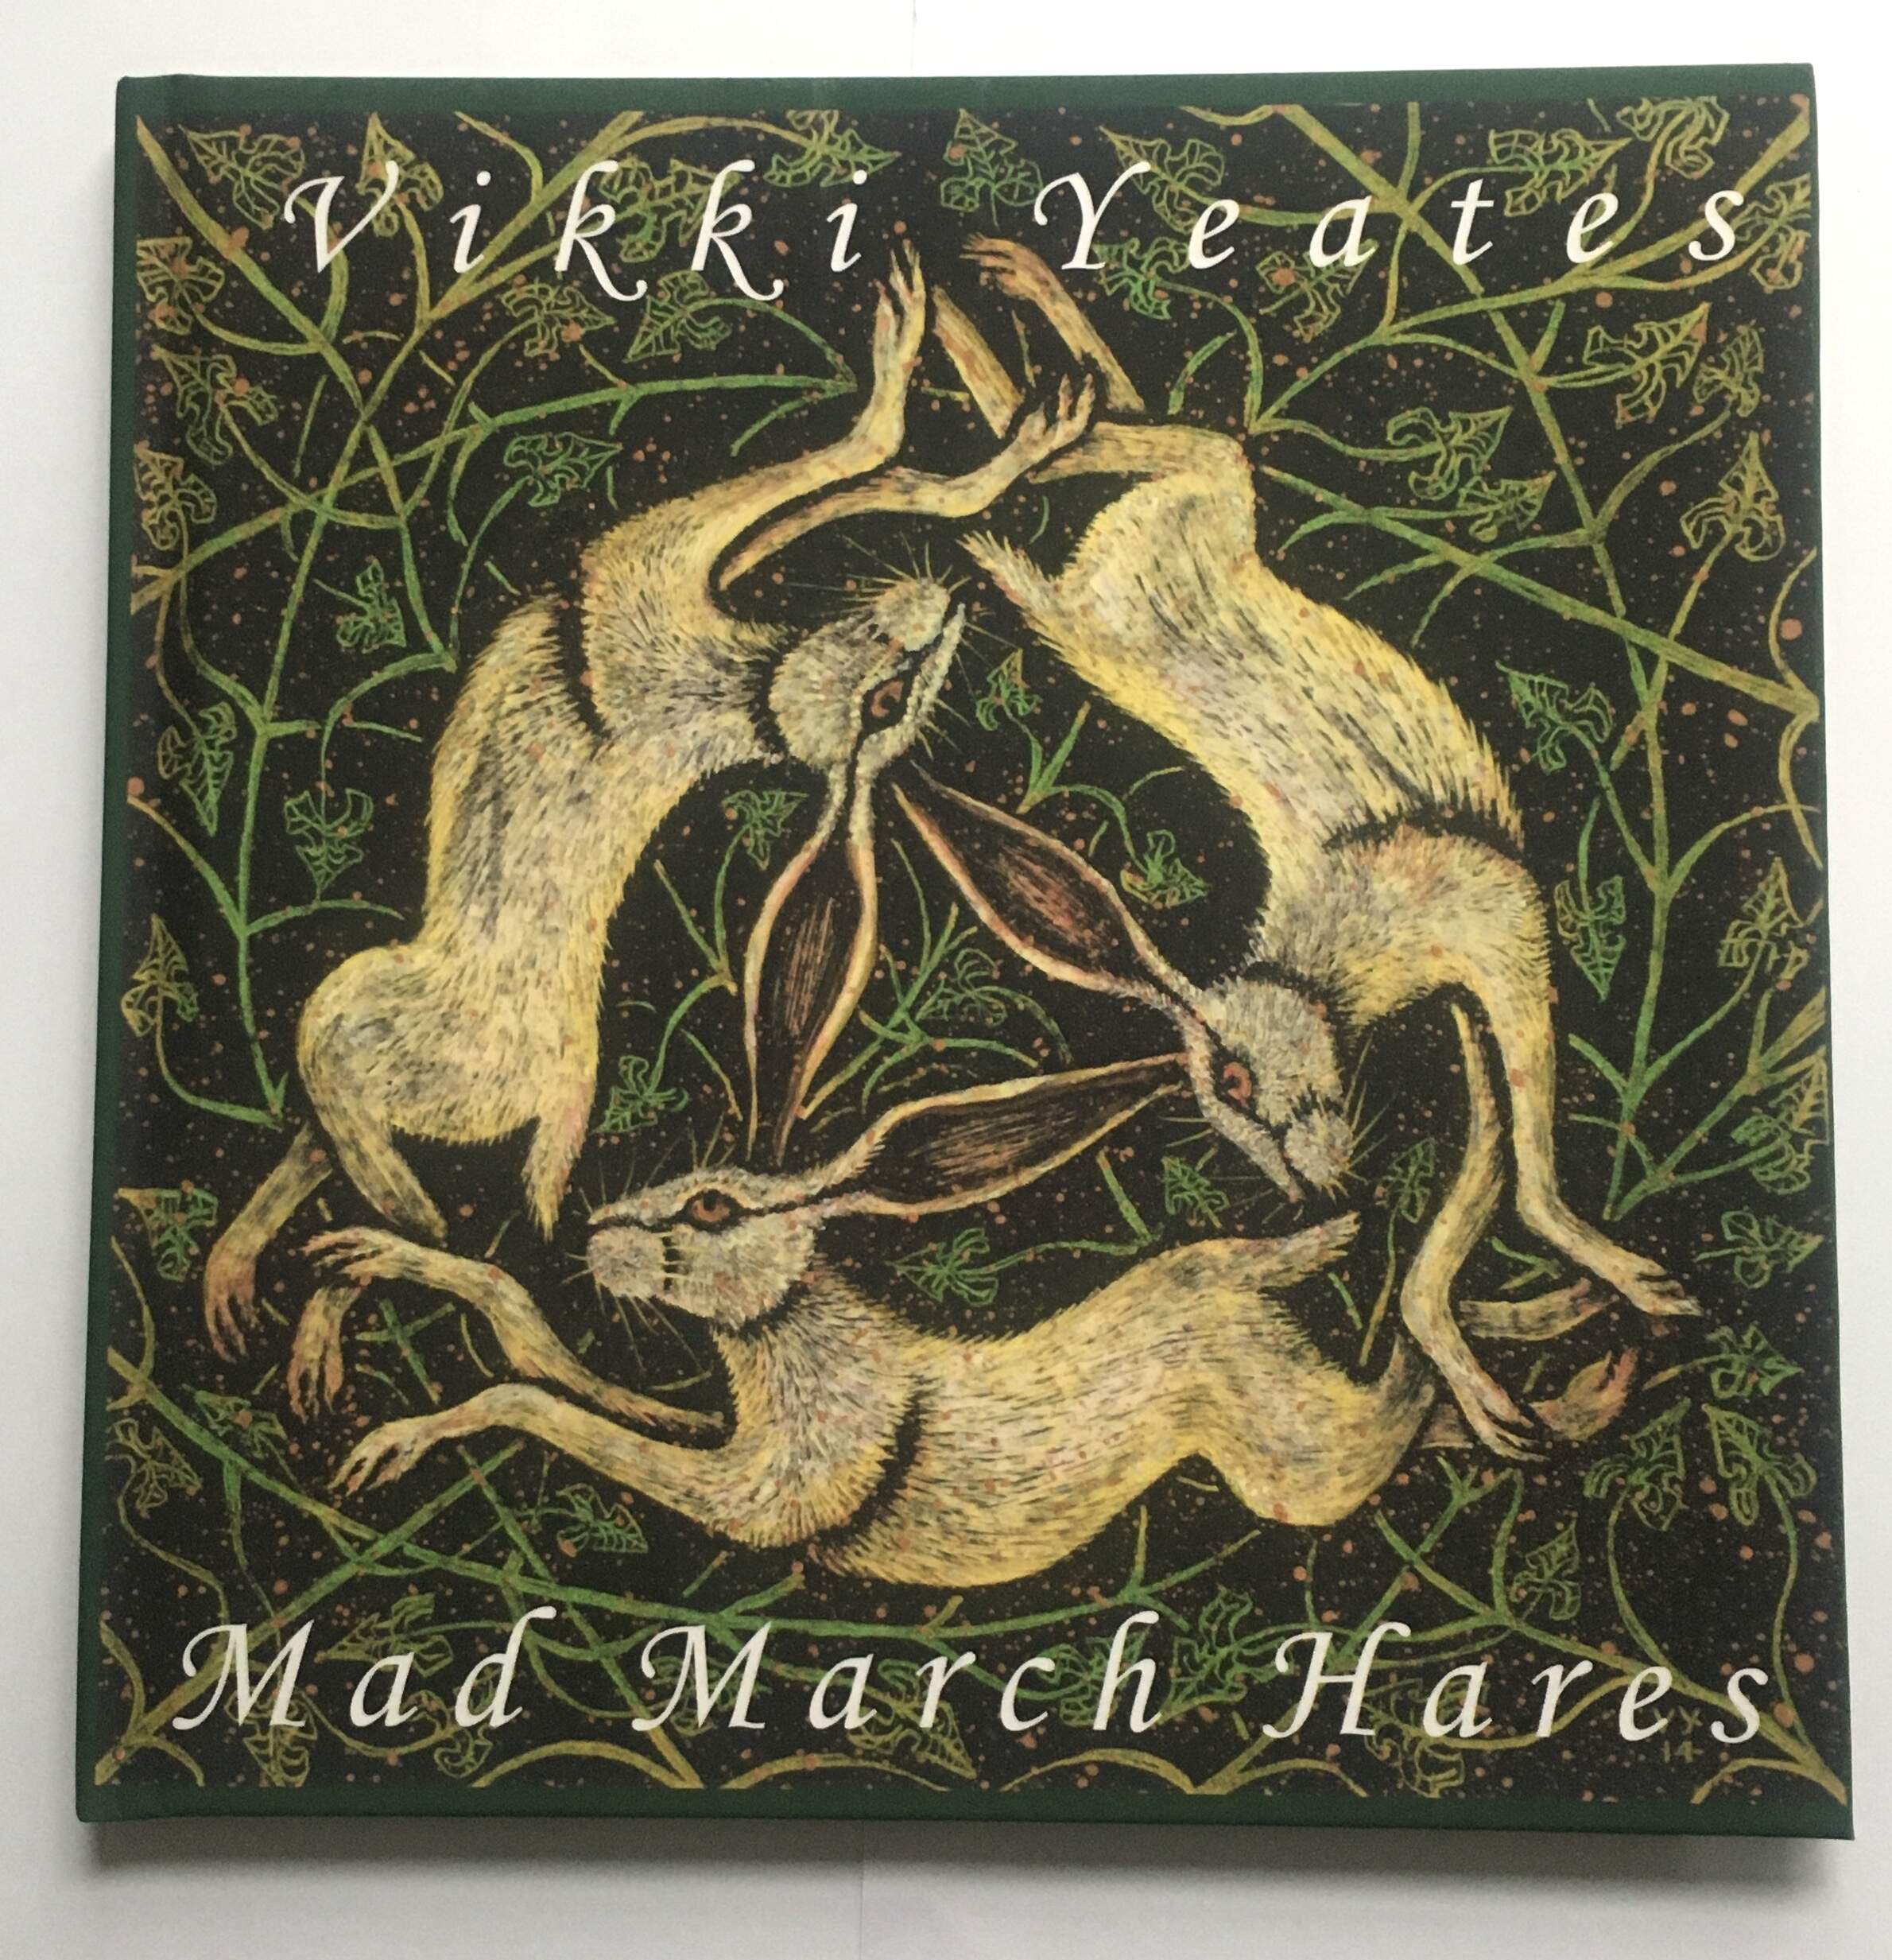 New hard cover version of 'Mad March Hares'